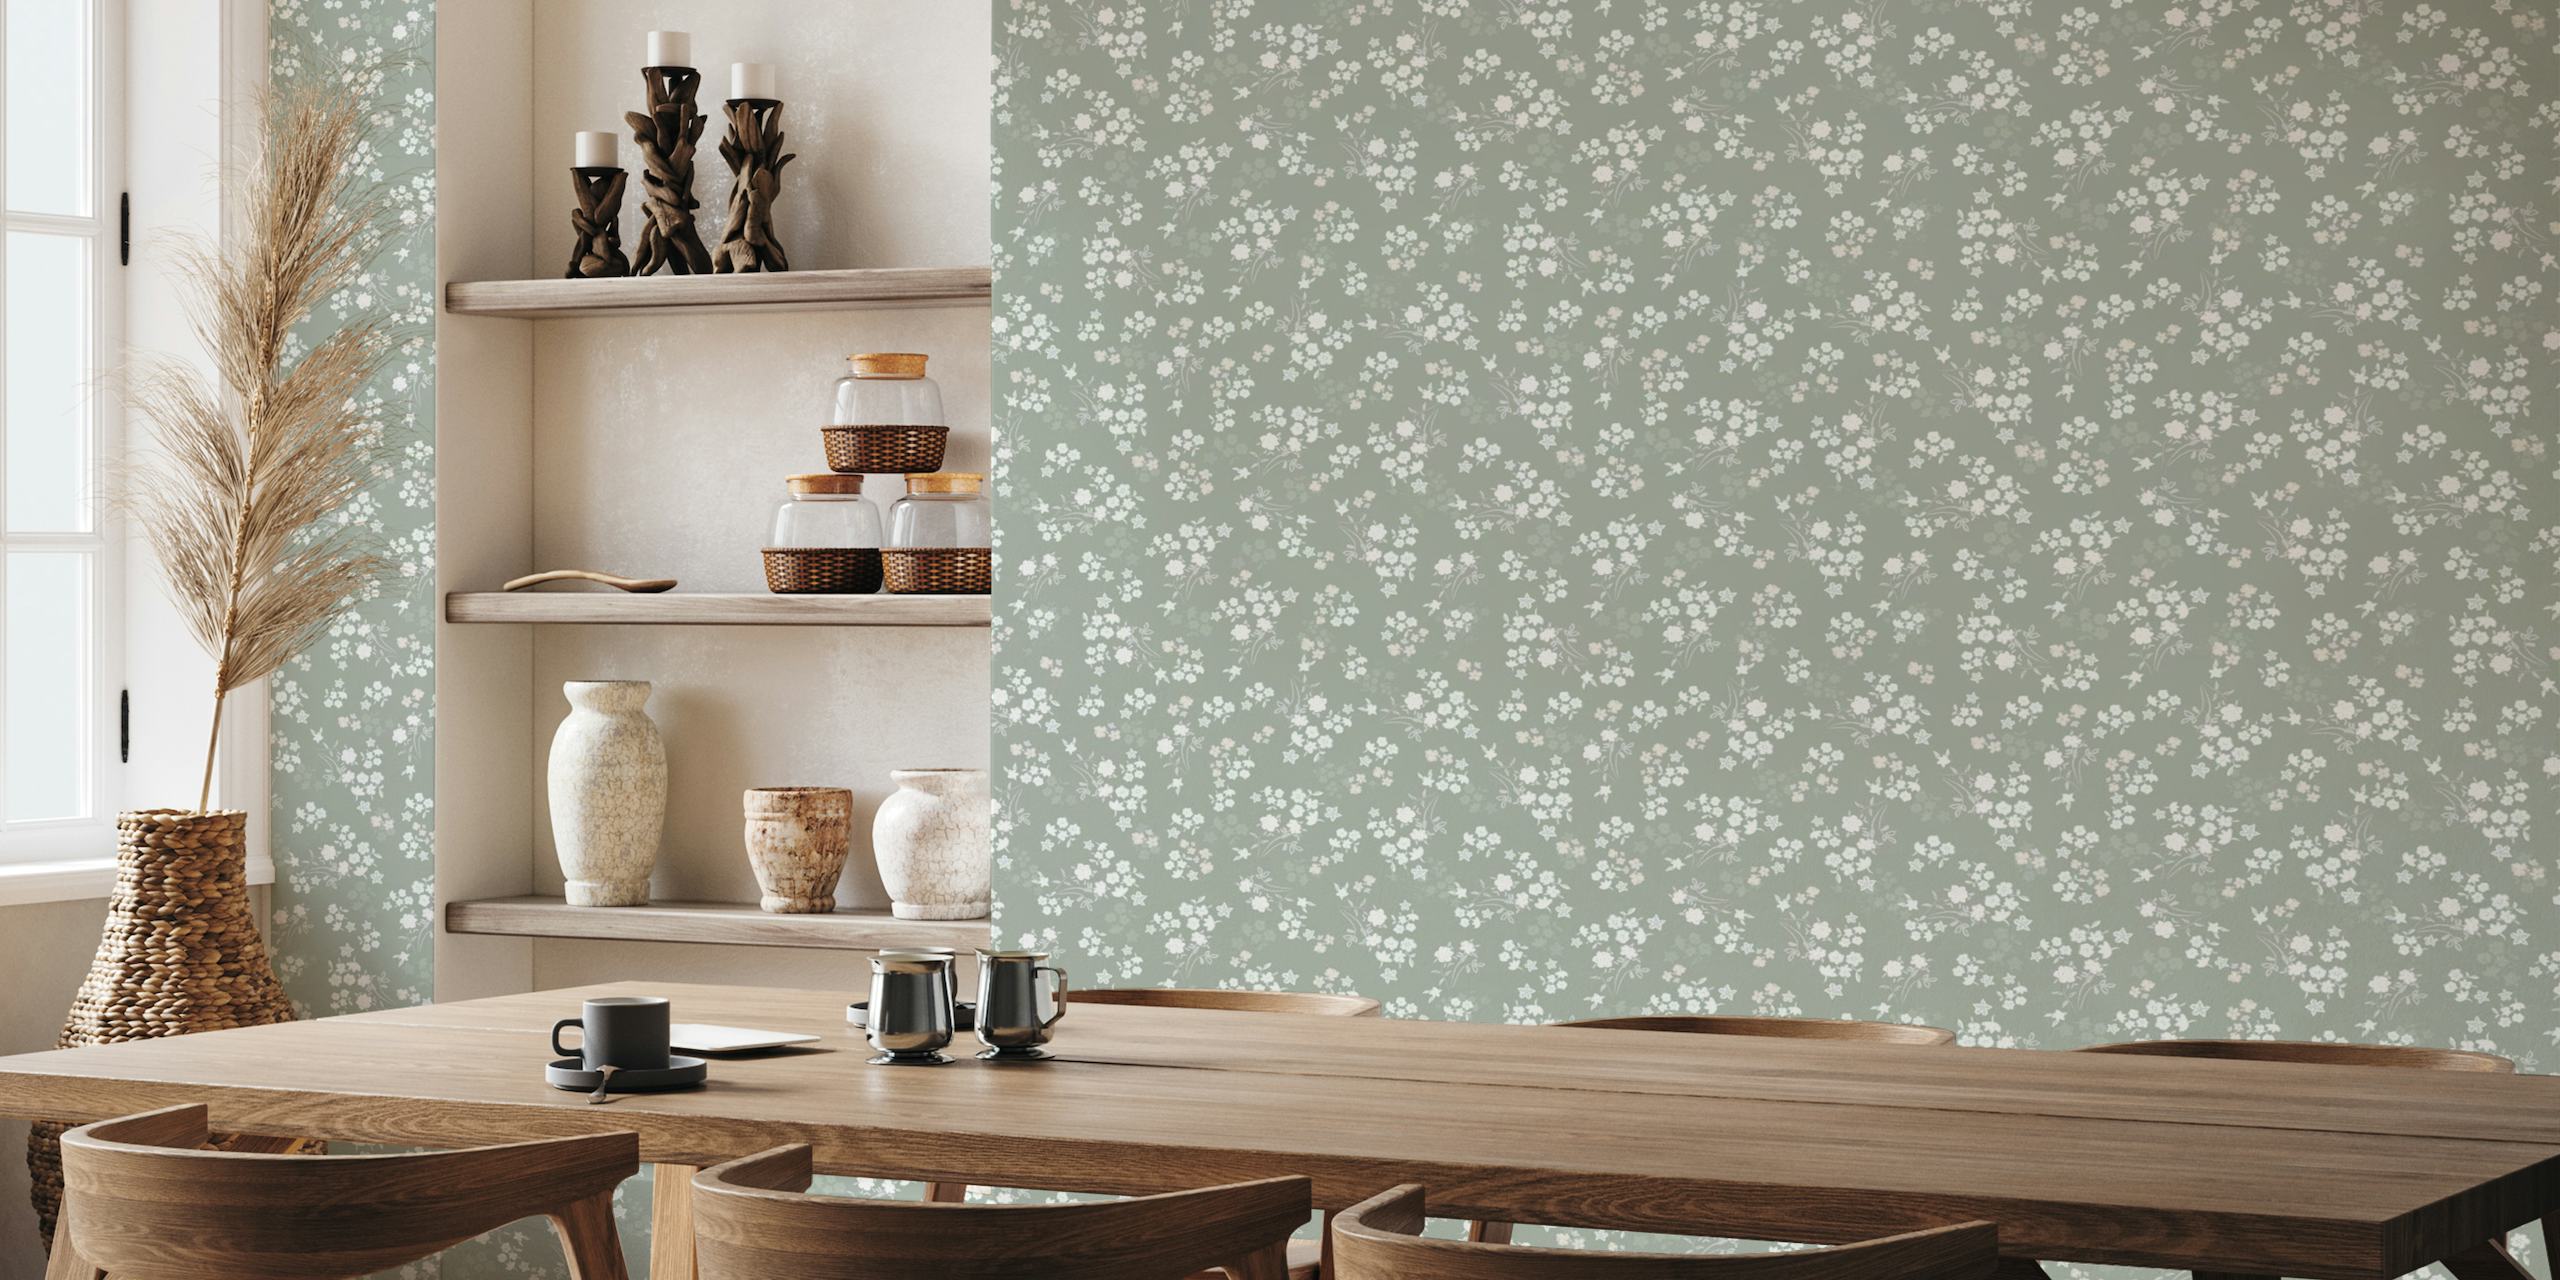 White ditsy pattern with green pattern wallpaper